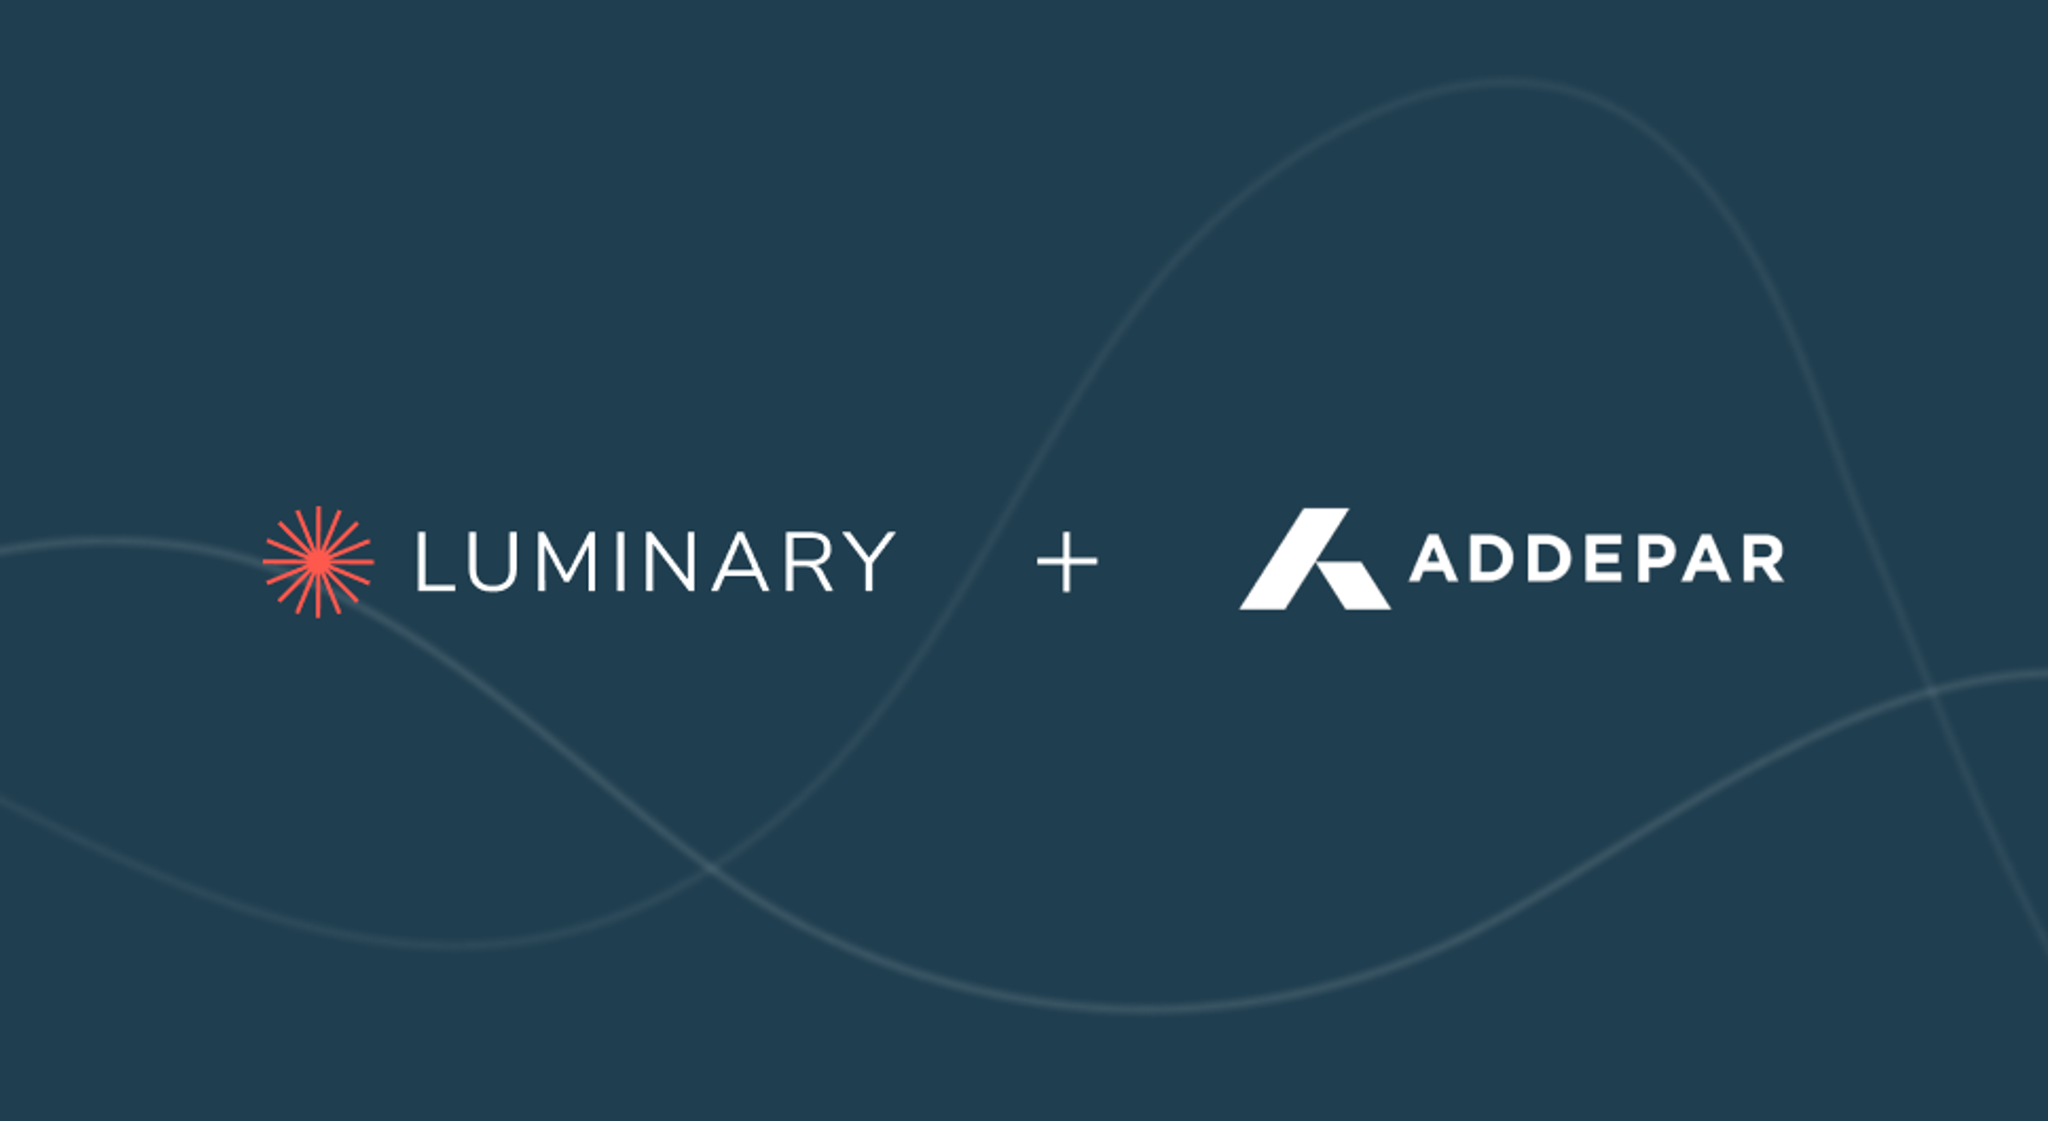 Luminary + Addepar: A new integration to streamline and elevate trust & estate planning